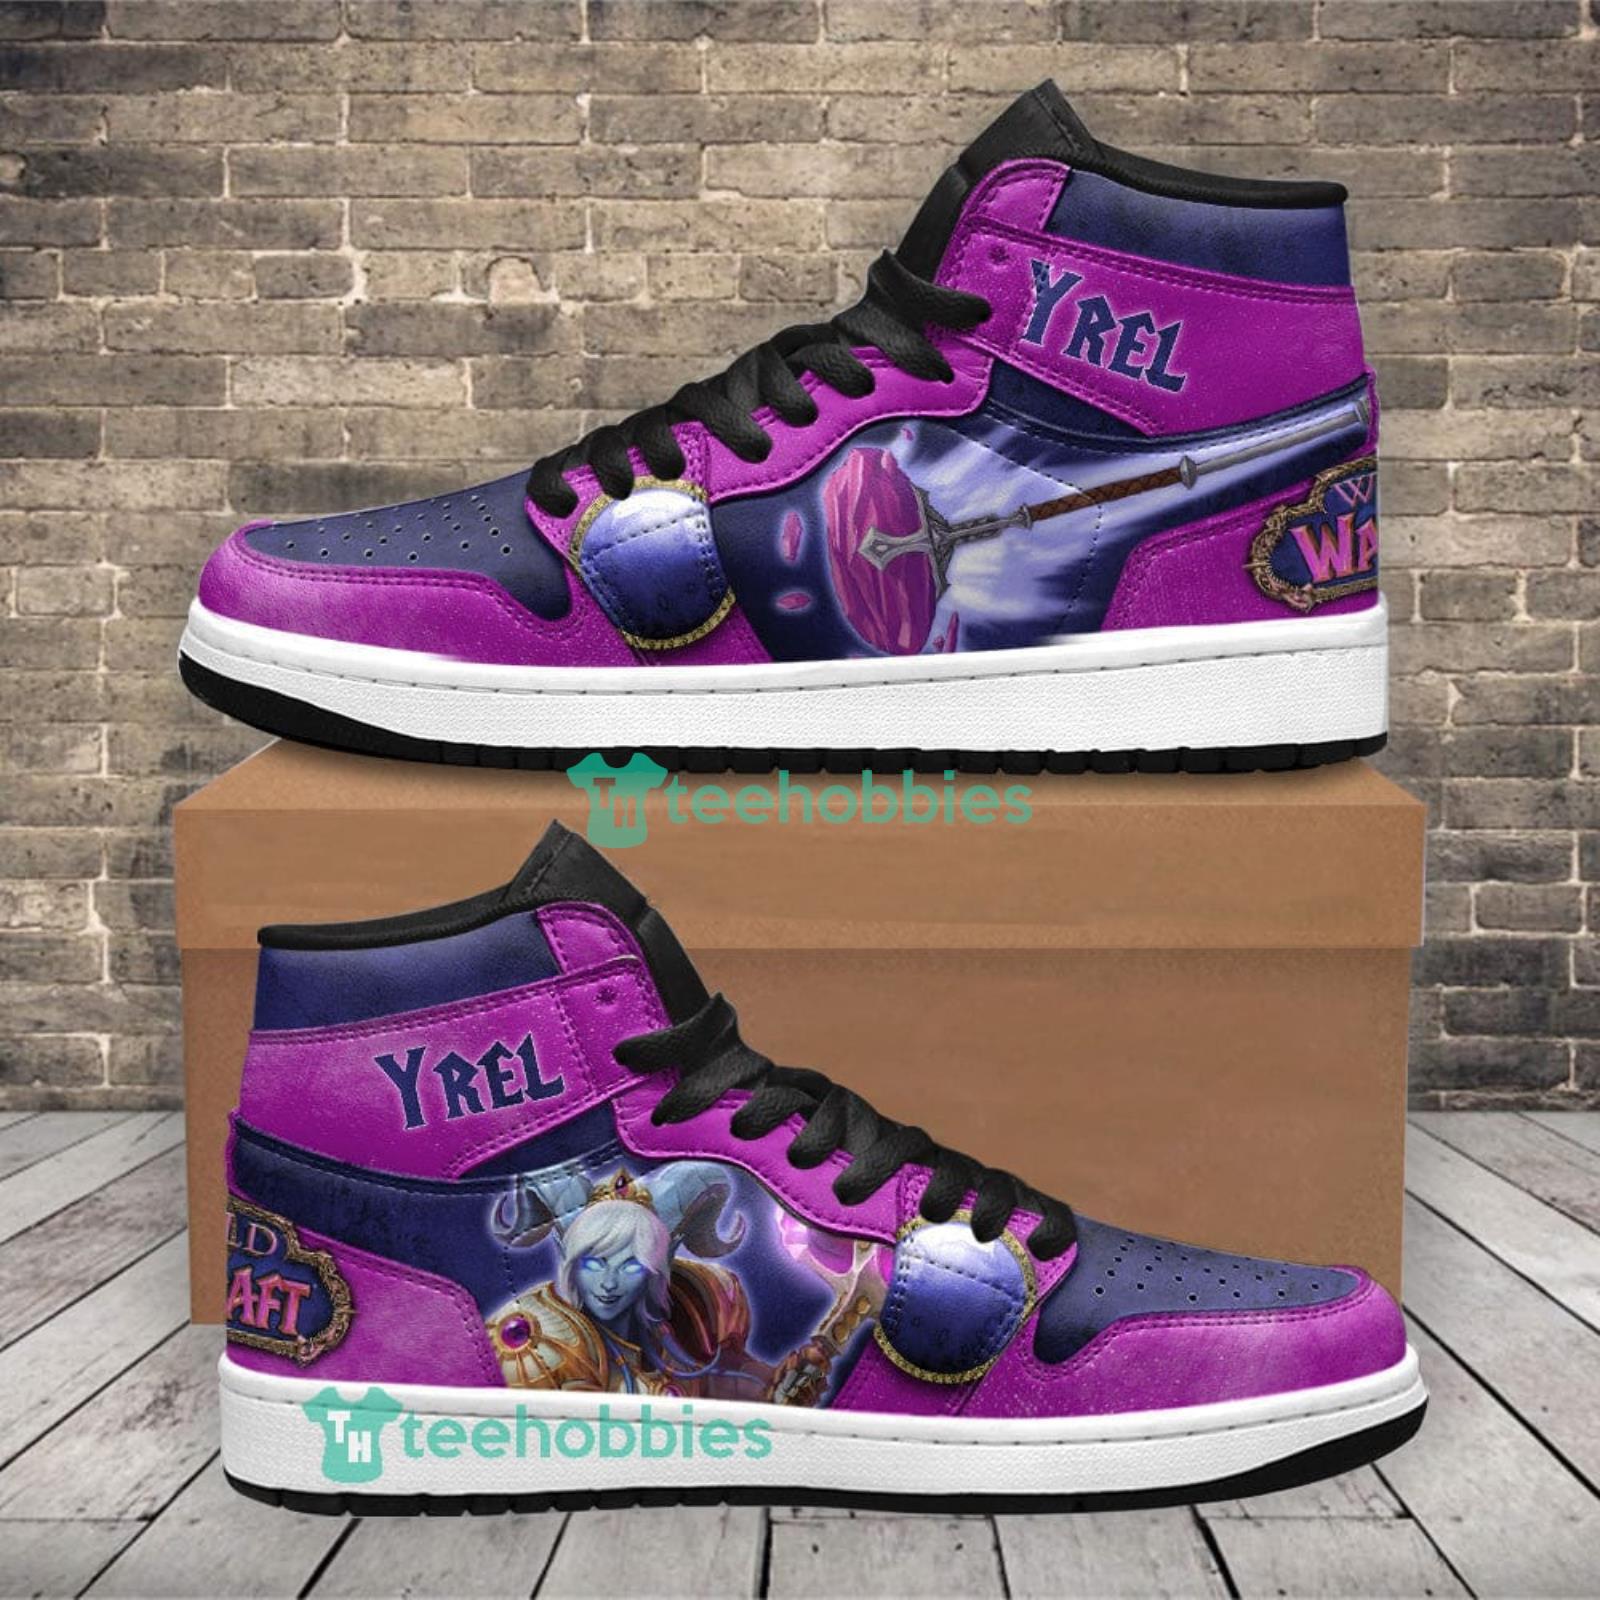 Yrel World of Warcraft Air Jordan Hightop Shoes Sneakers For Men And Women Product Photo 1